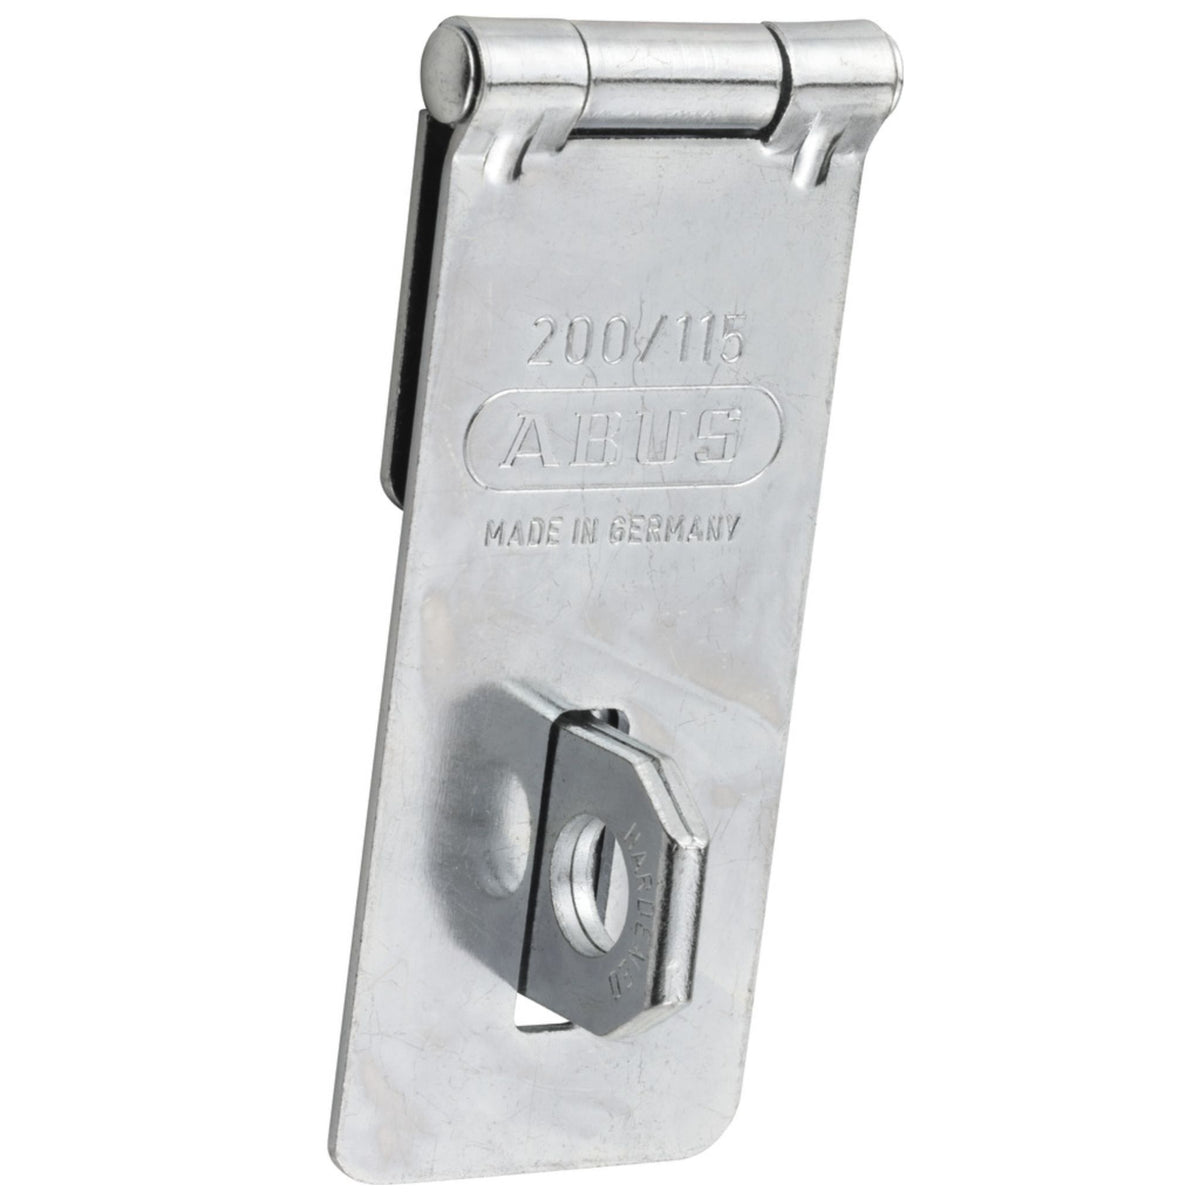 Abus 200/115 Hasp Hardened Steel Hasps 4-1/2-Inch Wide - The Lock Source